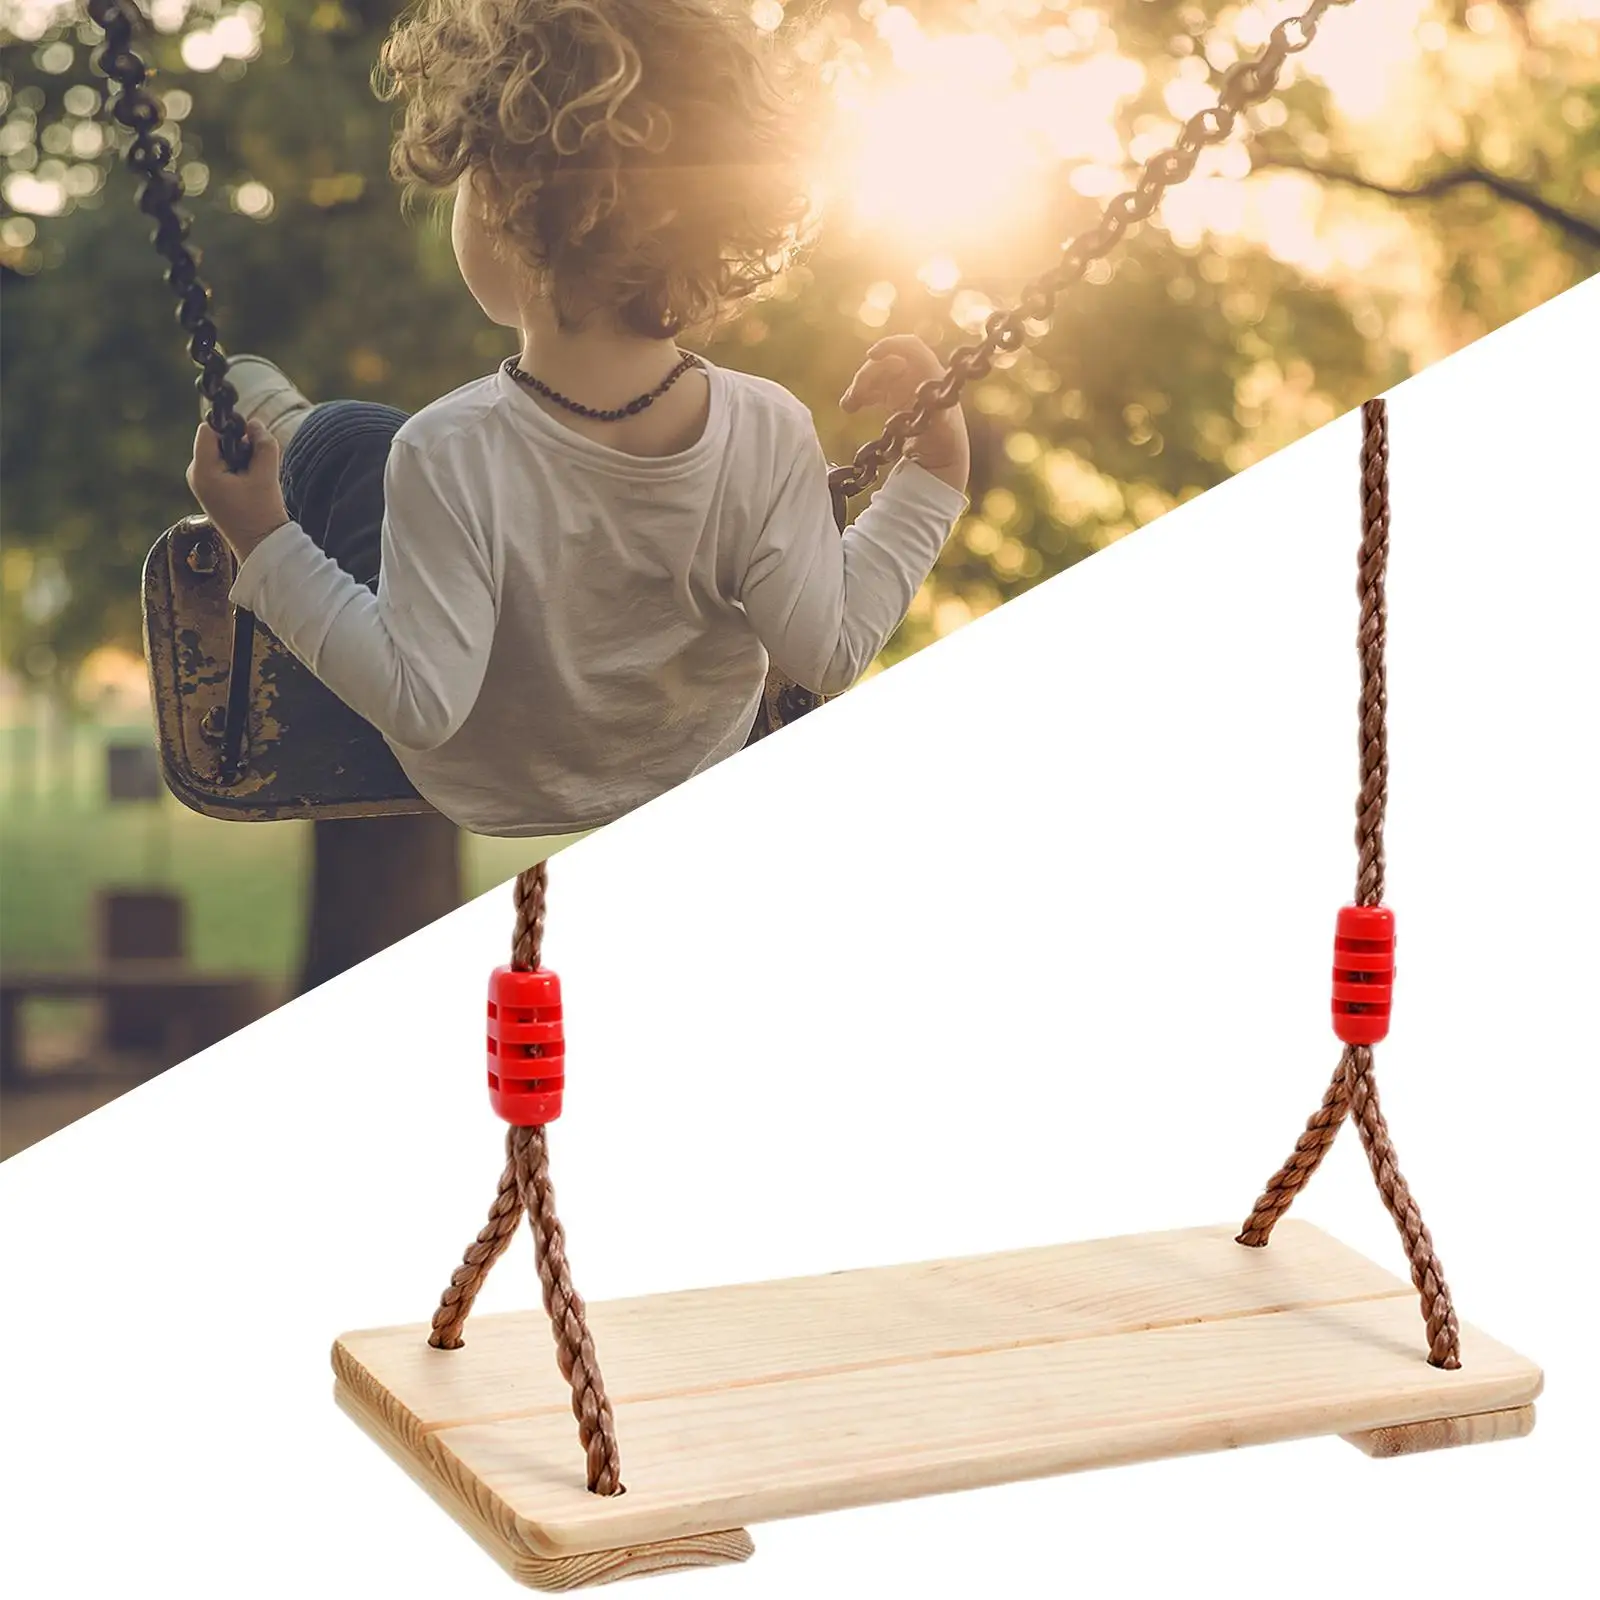 Kids Wooden Swing with Sturdy Rope Garden Swing Seat Chair Toddler Toys Durable Hanging Swing for Park Garden Outdoor Yard Tree